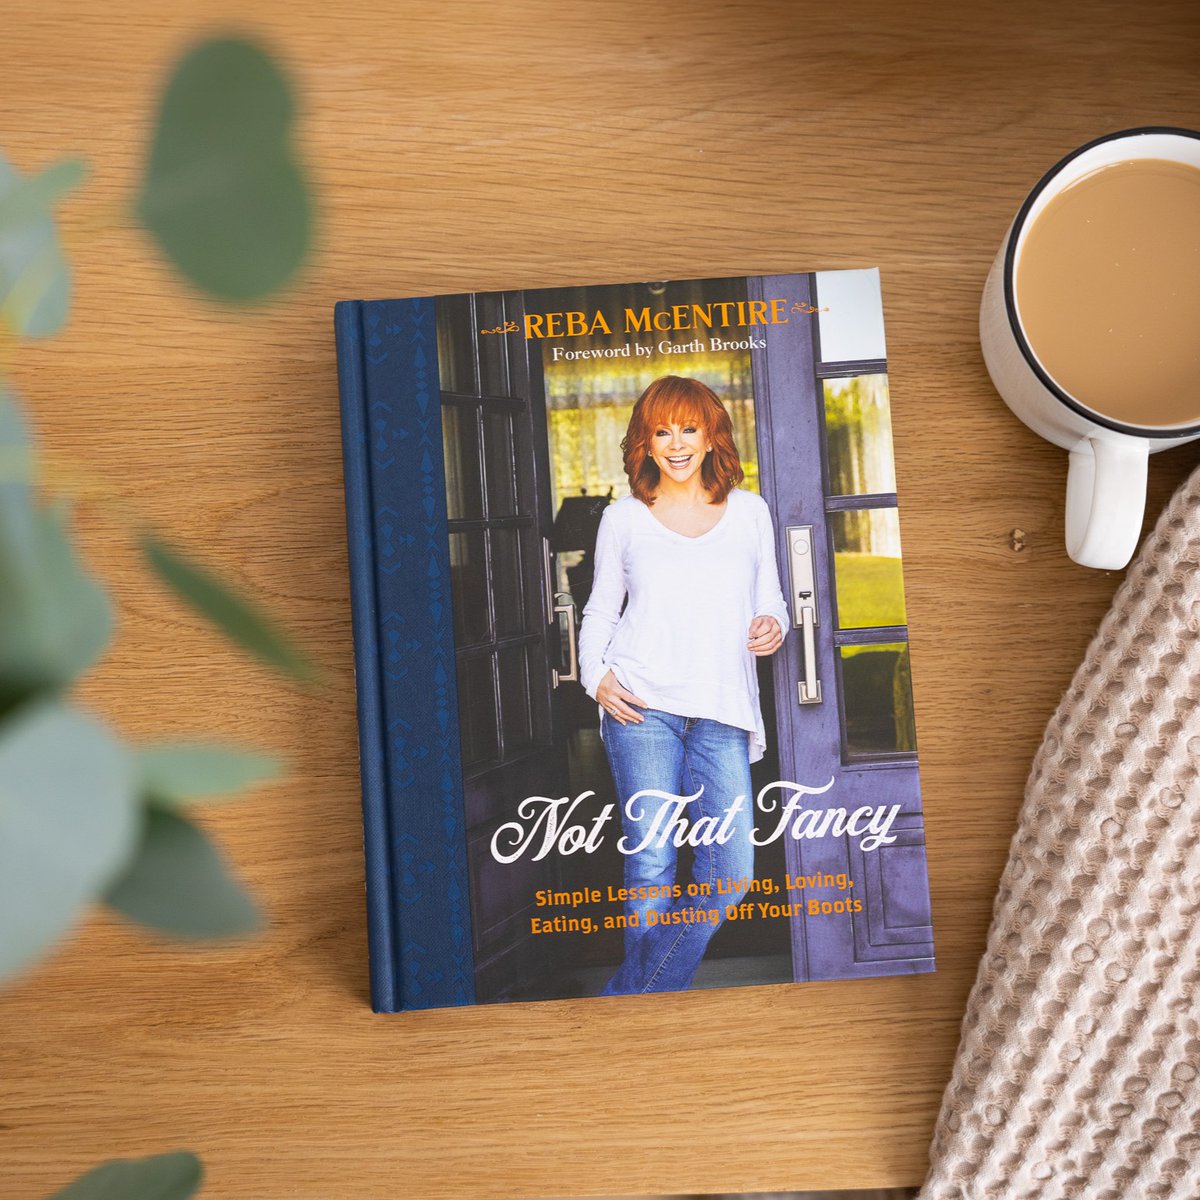 Reba McEntire's first book in over two decades now available! This photo-driven books featuring all-things-Reba invites you to go back to the basics of life: fun, food, friends, and family. Hear Reba's untold stories and find your copy online or in stores today!